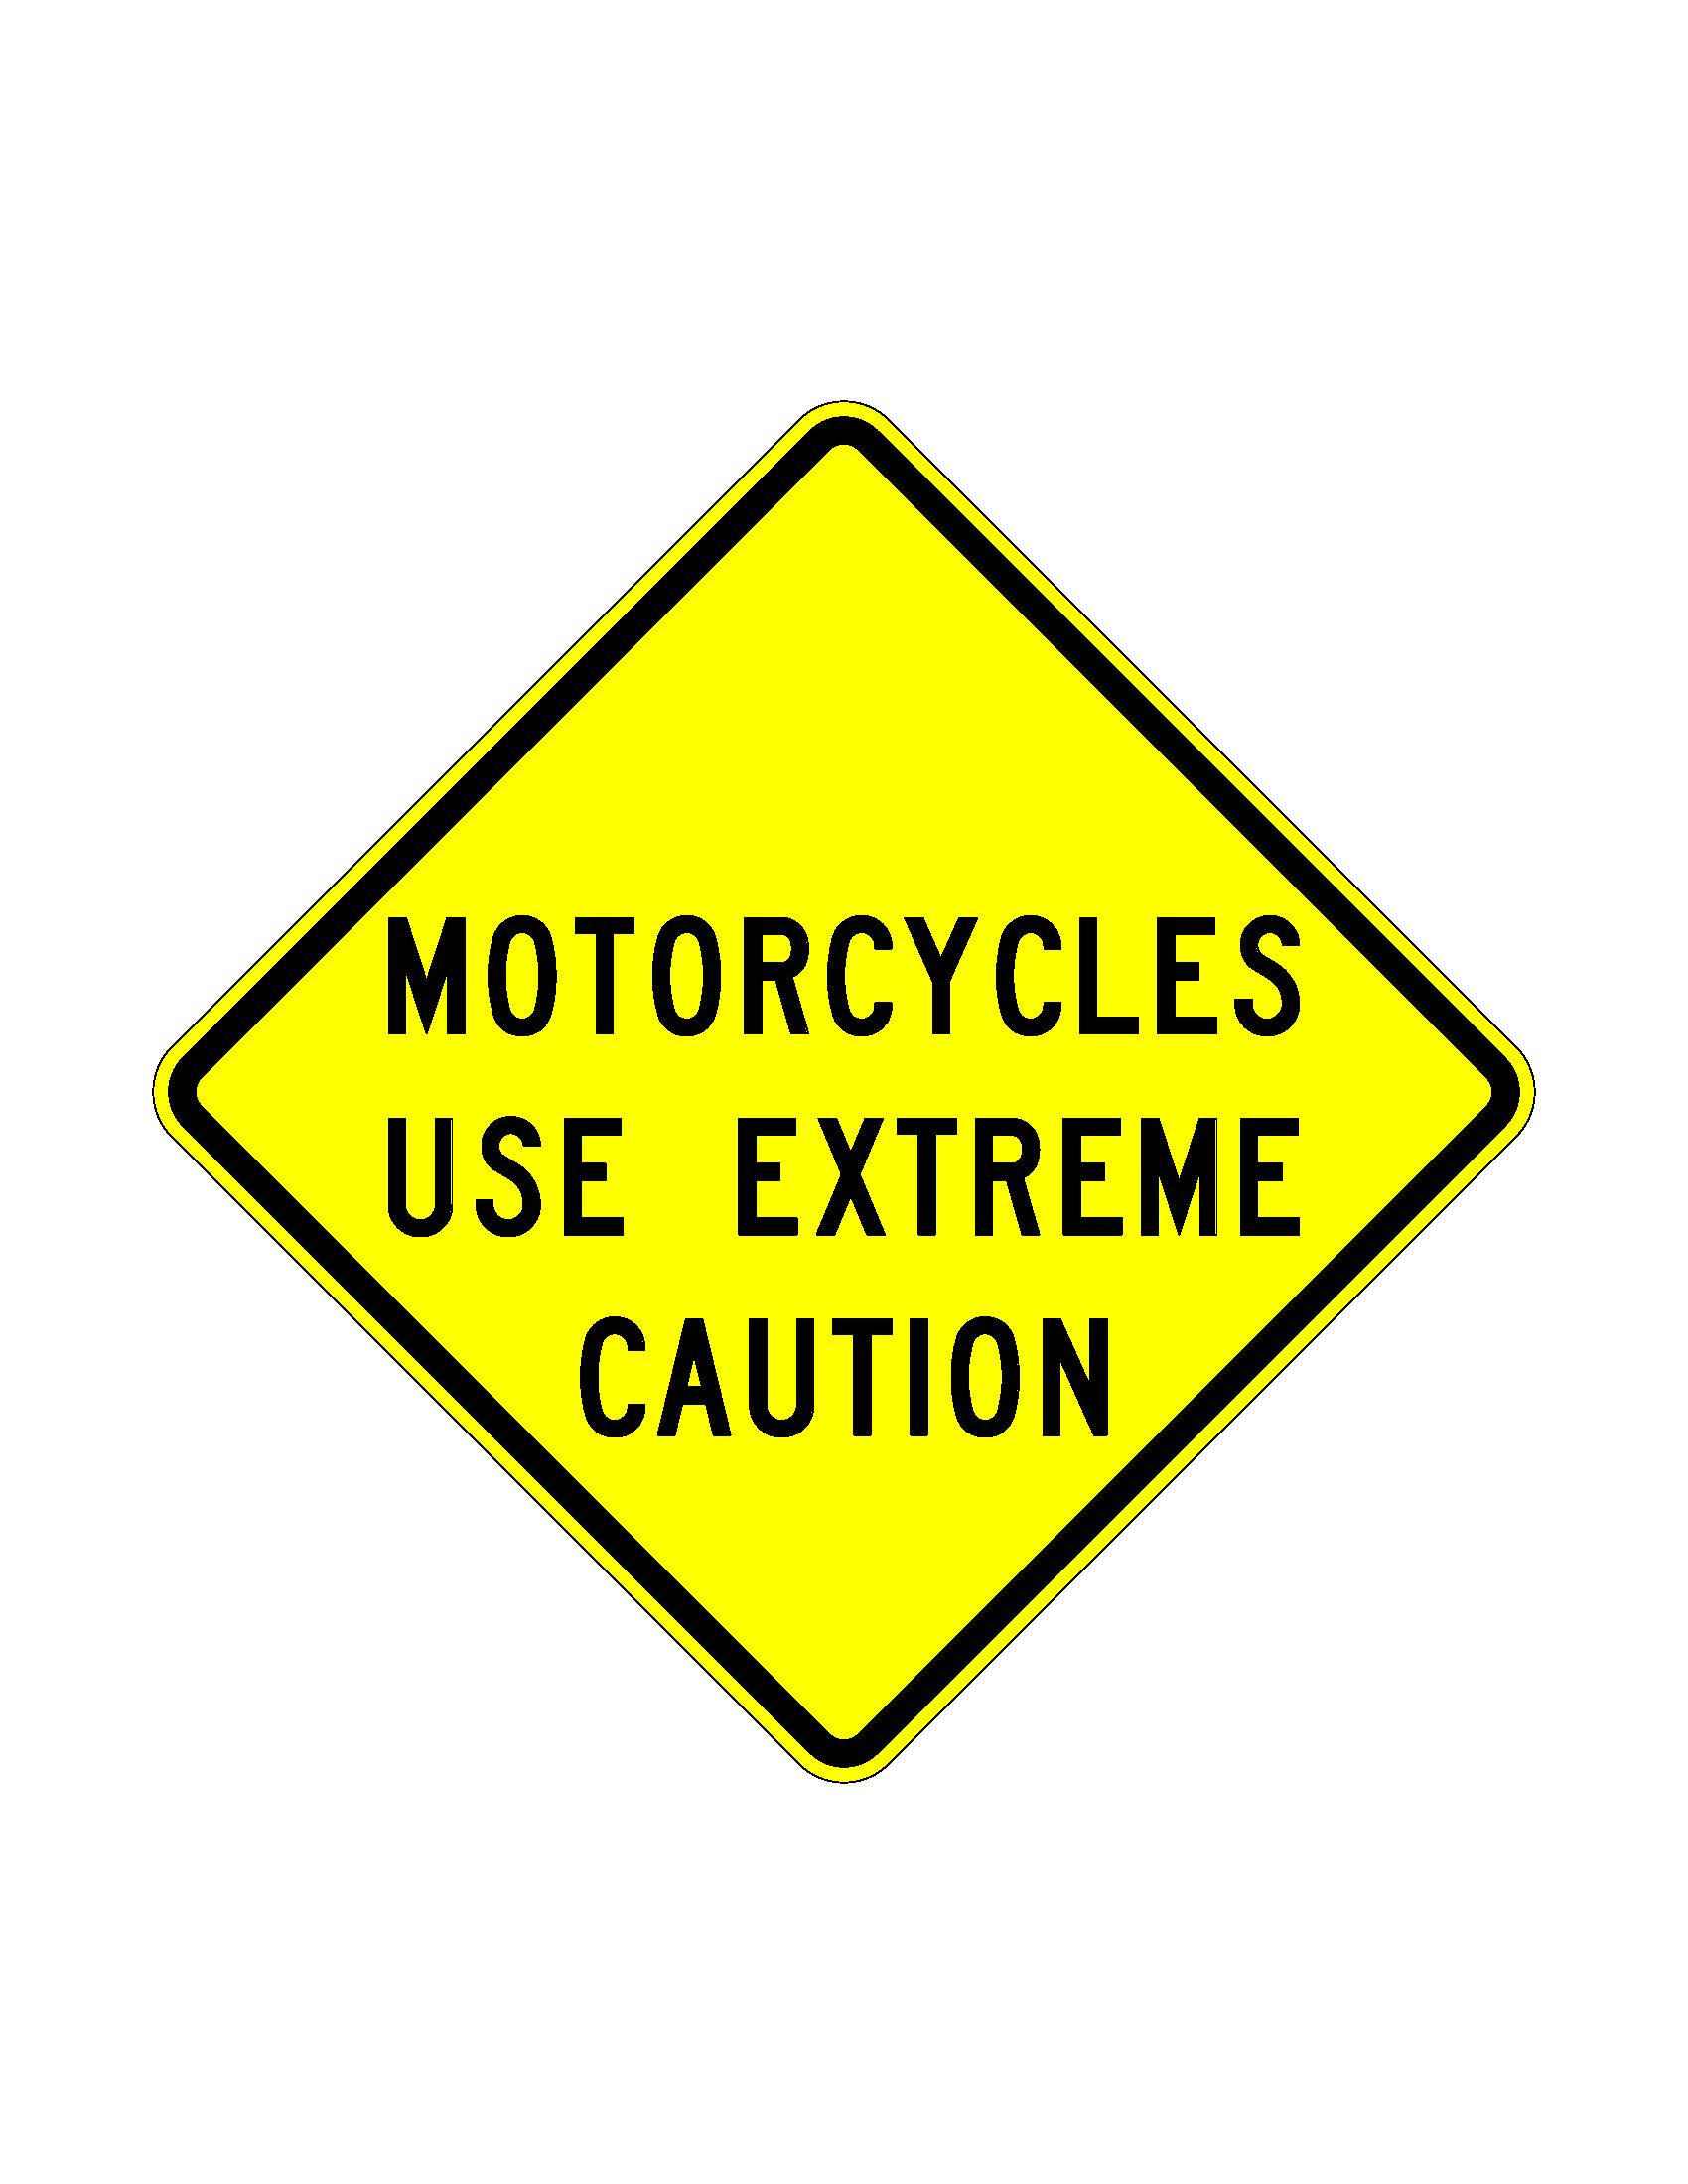 W12-55 Motorcycles Use Extreme Caution JPEG detail image